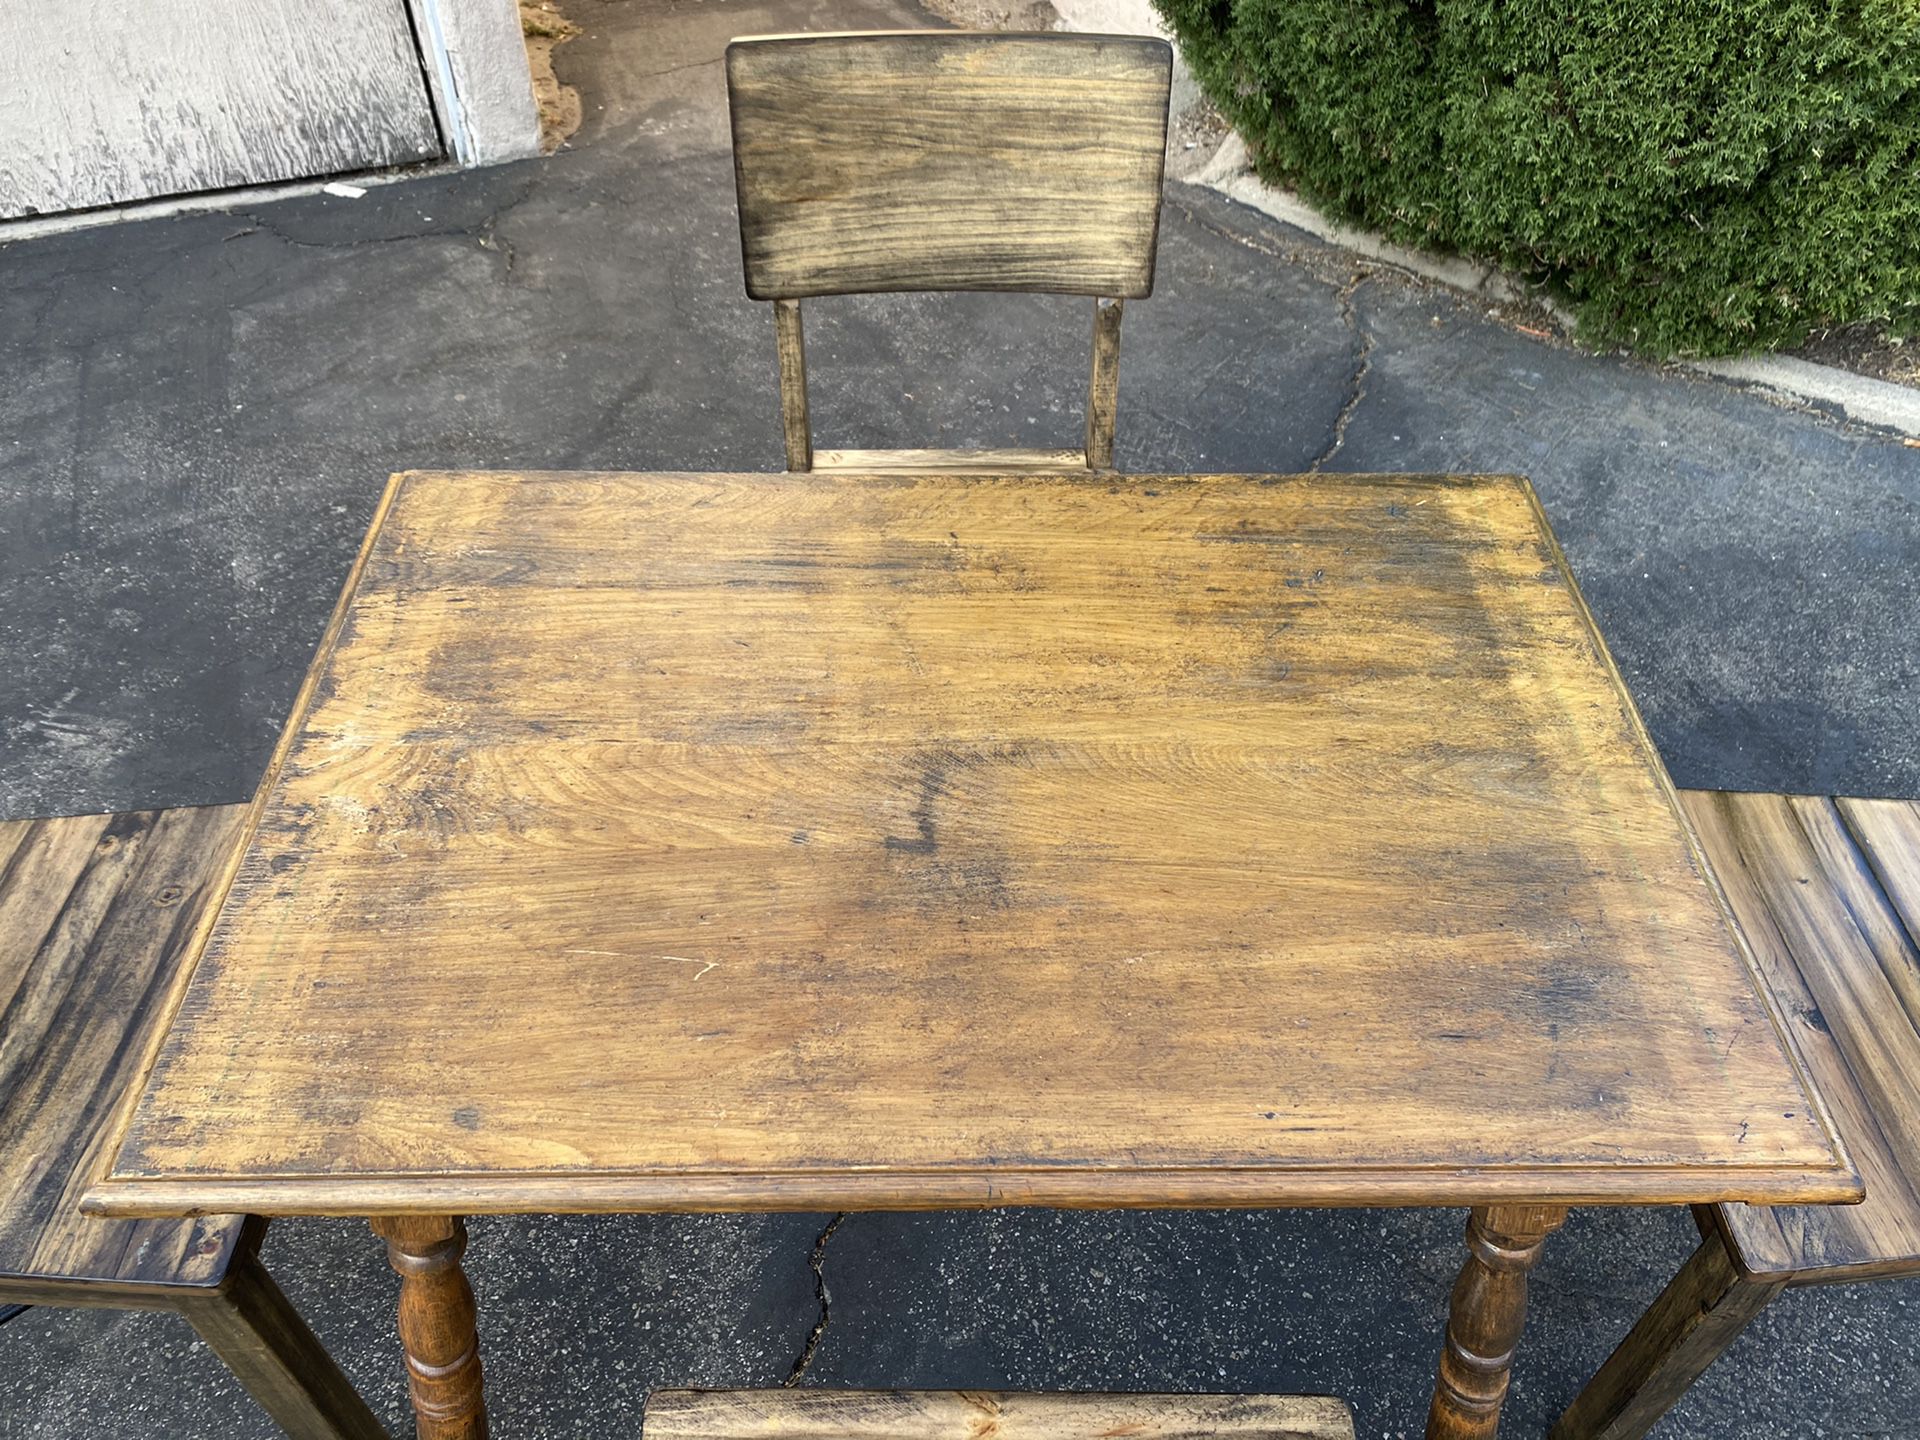 Moving! Antique Drop Leaf Dining Table with Four Chairs!